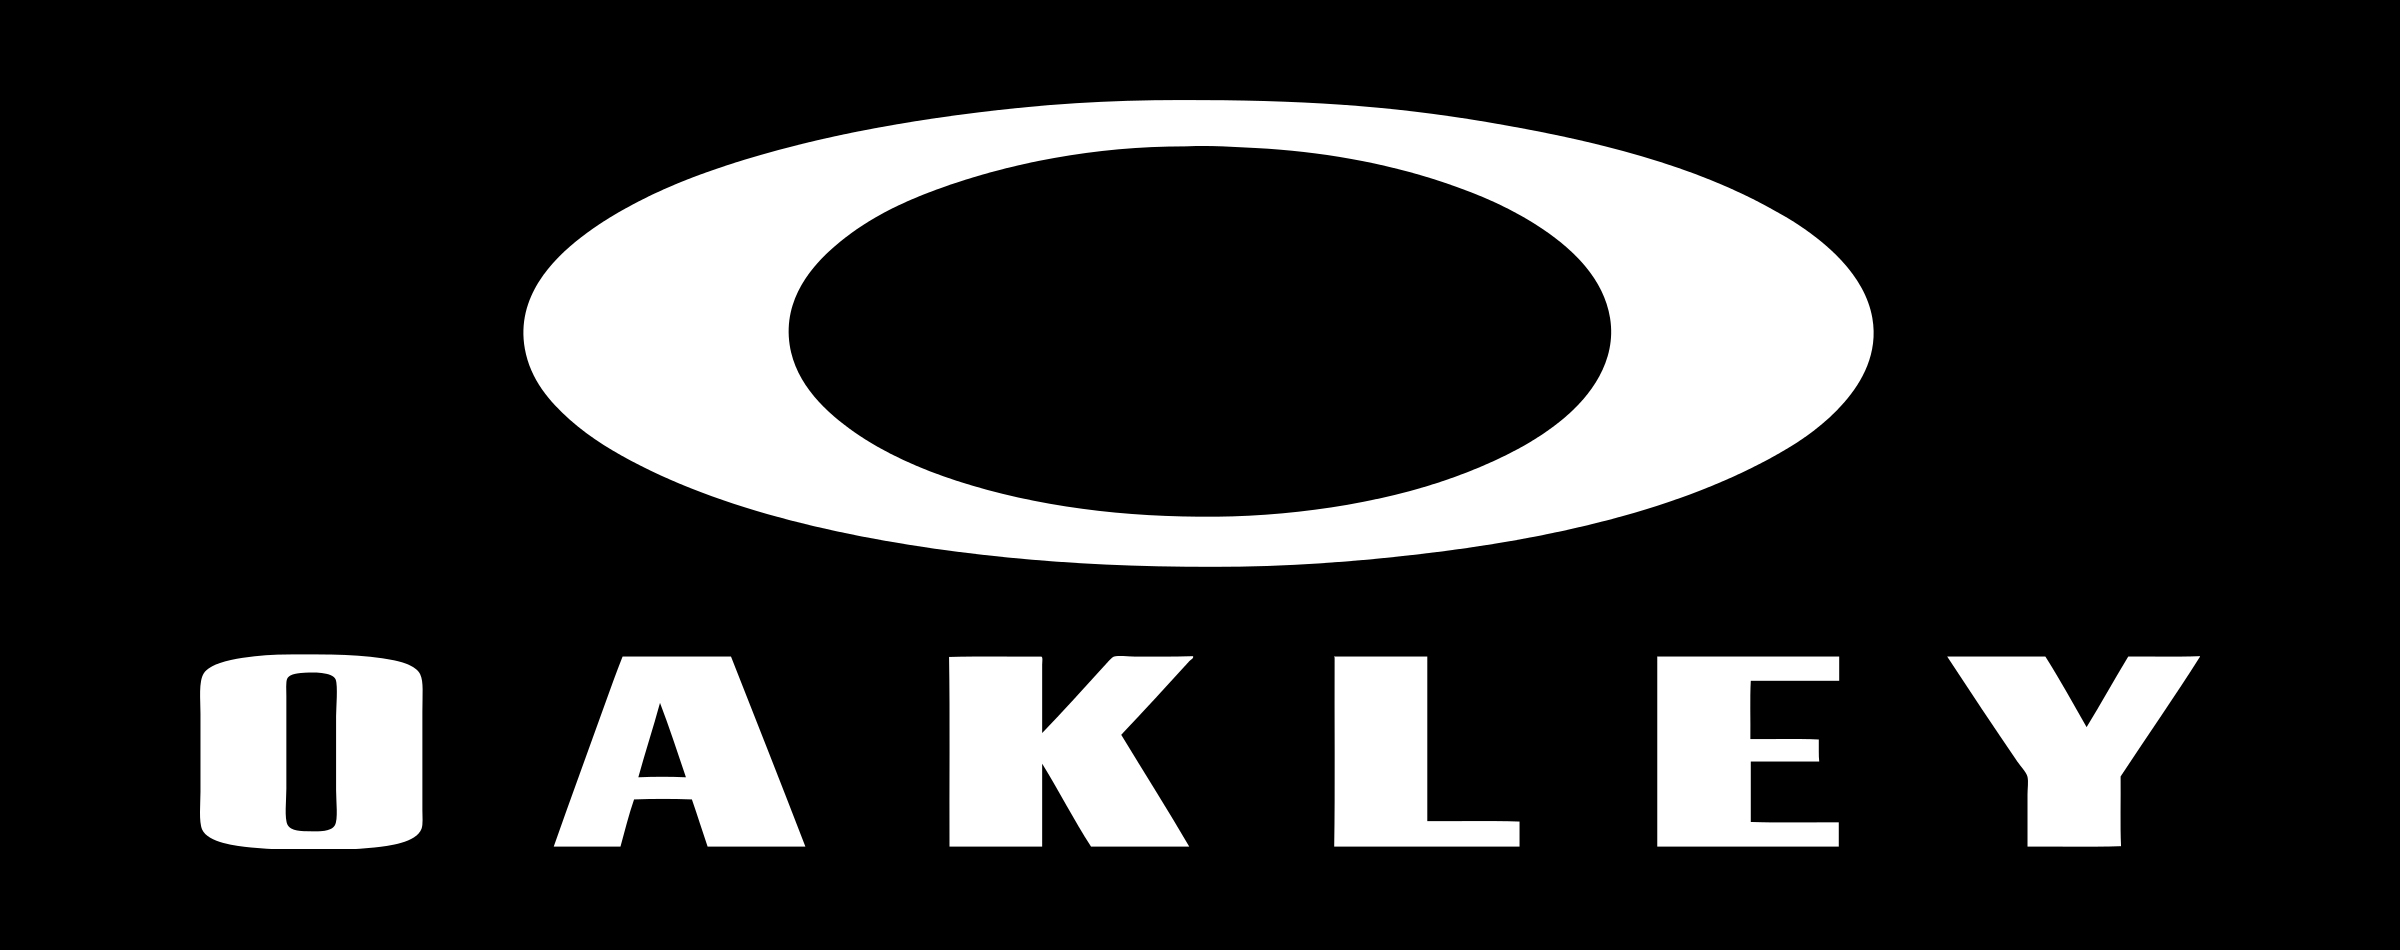 Oakley logo and symbol, meaning 